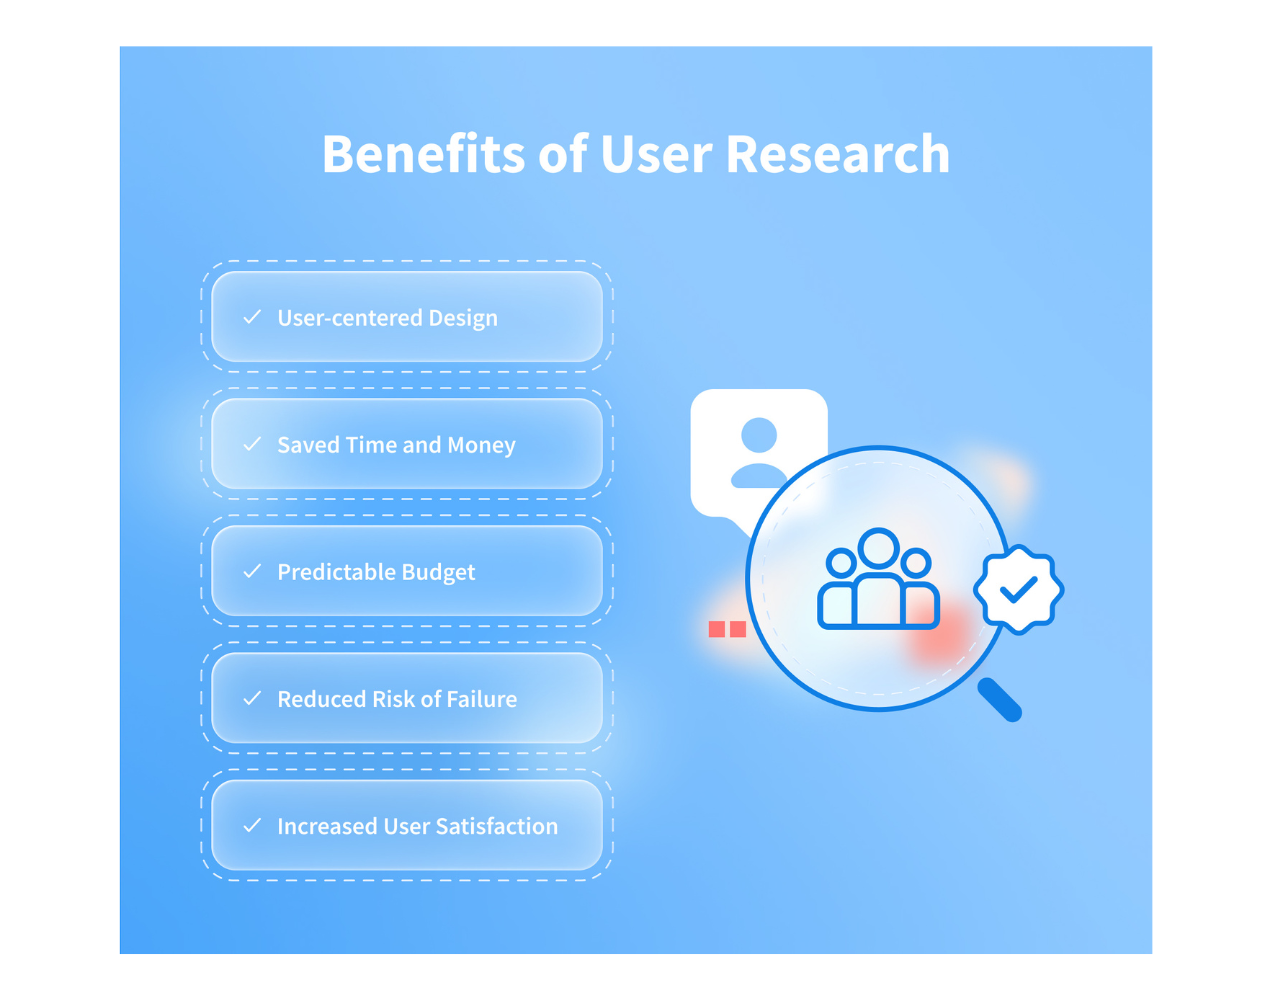 Benefits of user research